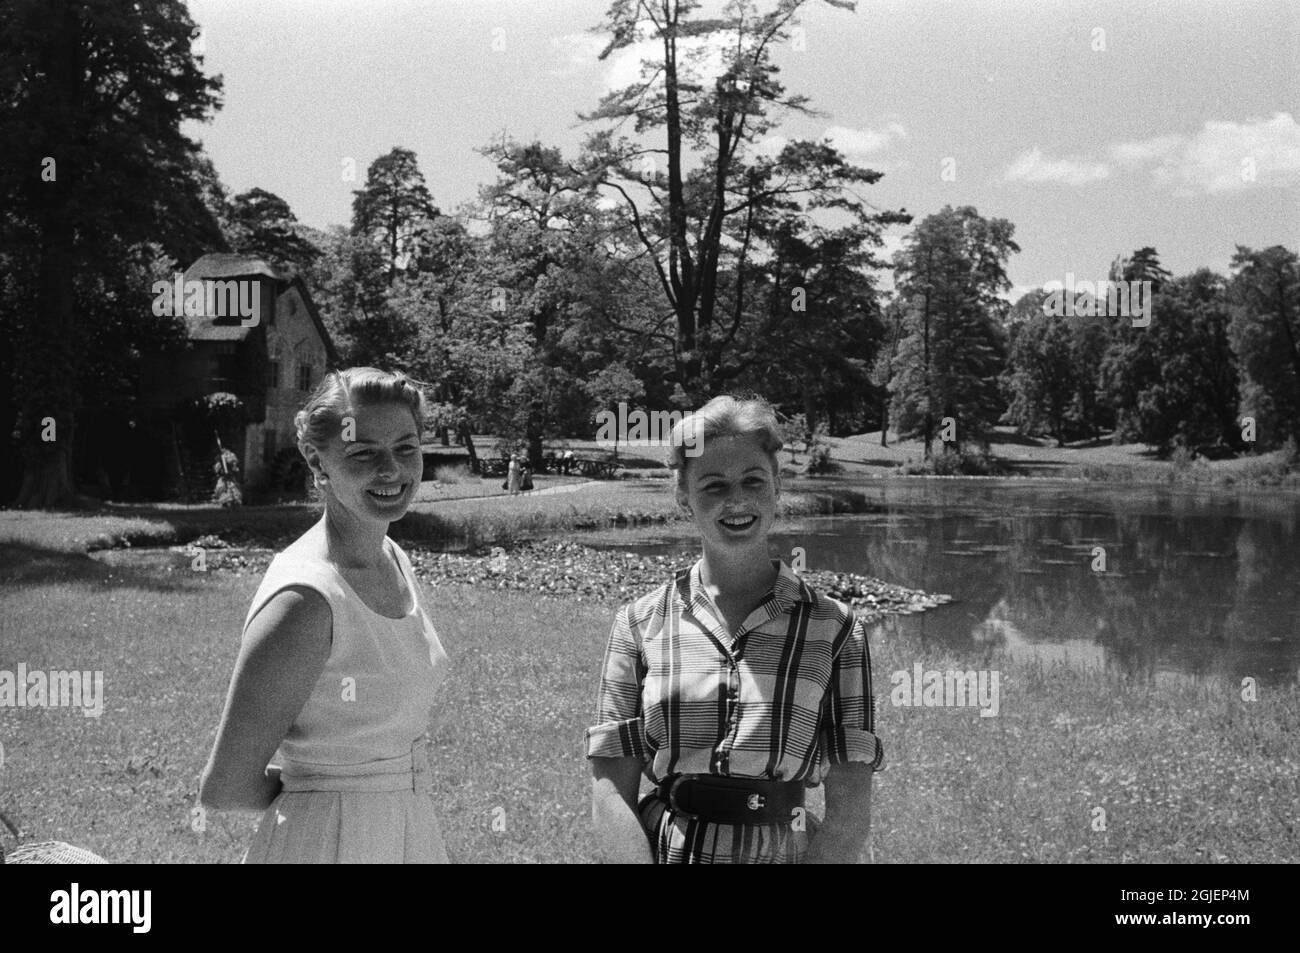 Actress Ingrid Bergman during a visit to Versailles together with her daughter Pia Lindstrom. Stock Photo